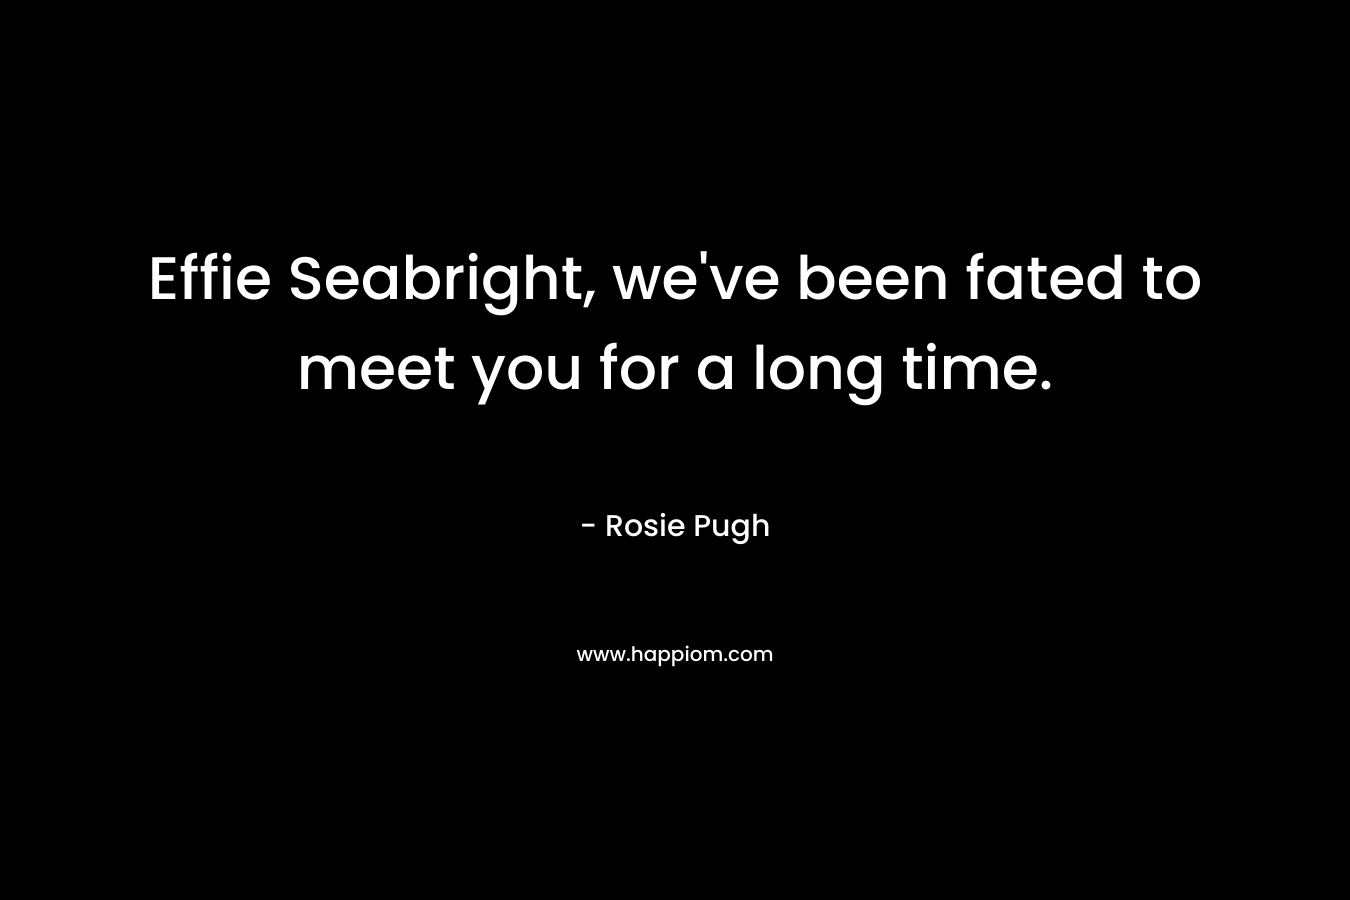 Effie Seabright, we’ve been fated to meet you for a long time. – Rosie Pugh